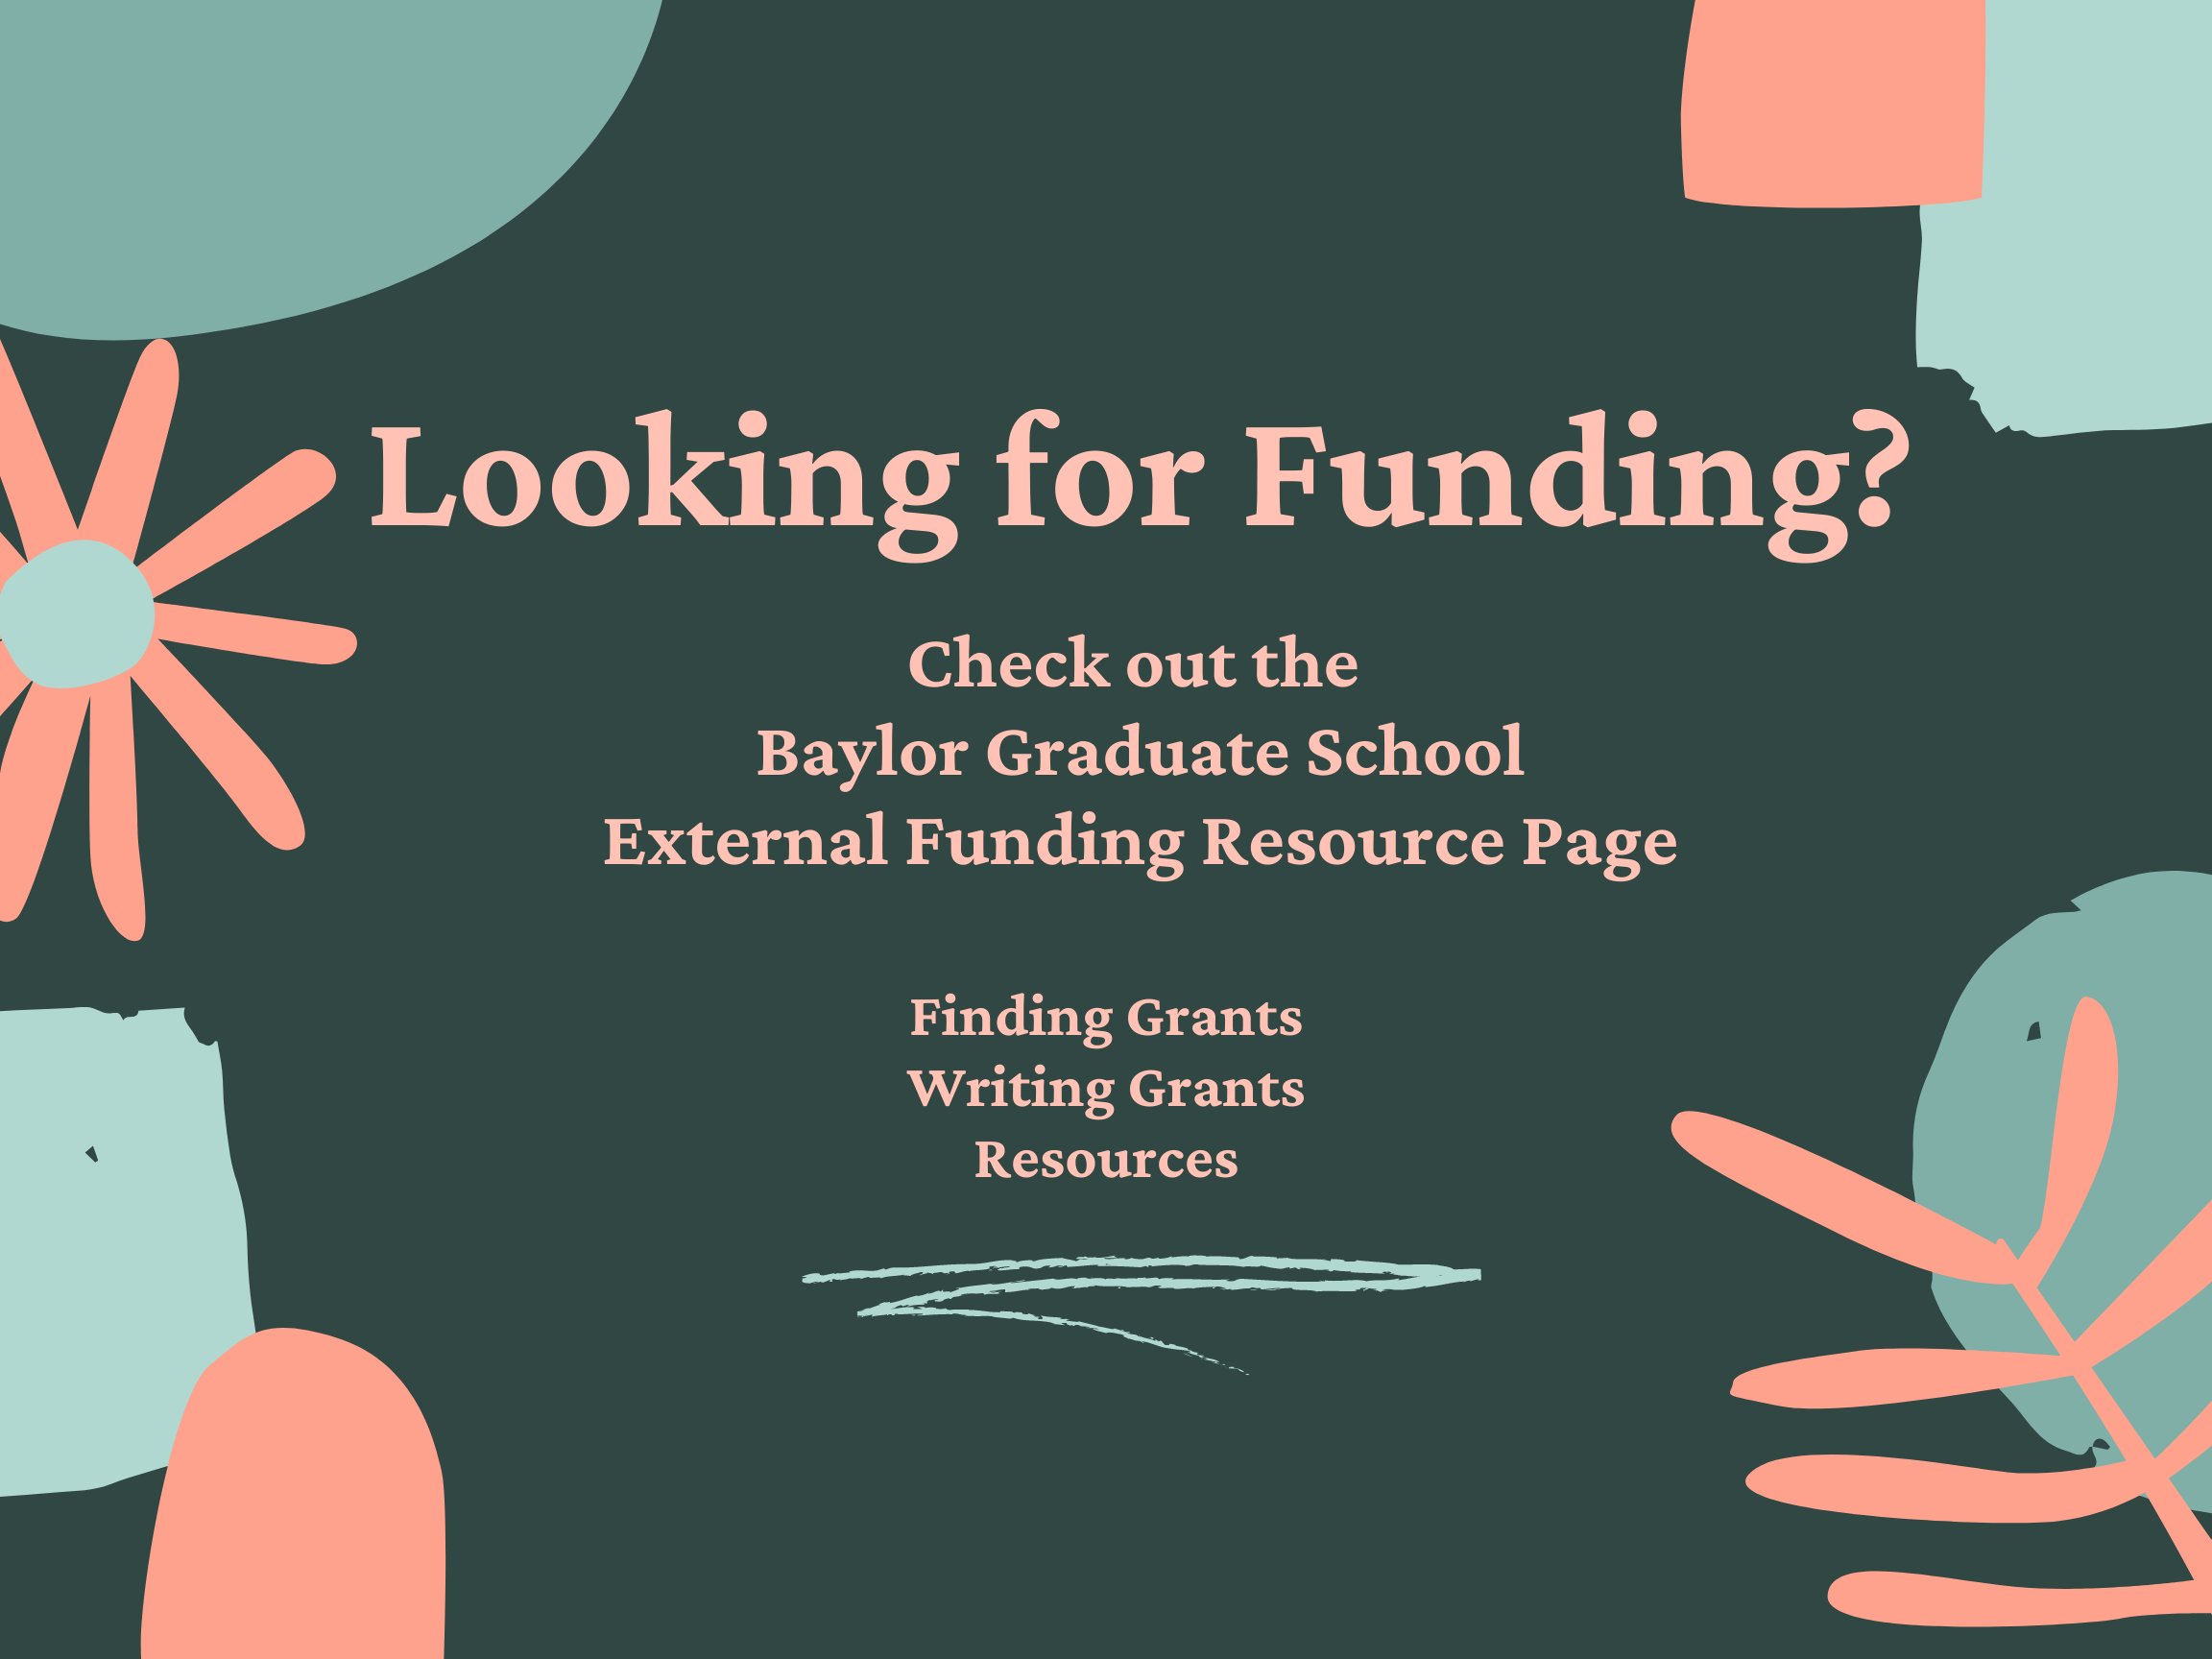 Looking for funding? Check out the Baylor Graduate School External Funding Resource Page. Finding funding, writing grants, resources.